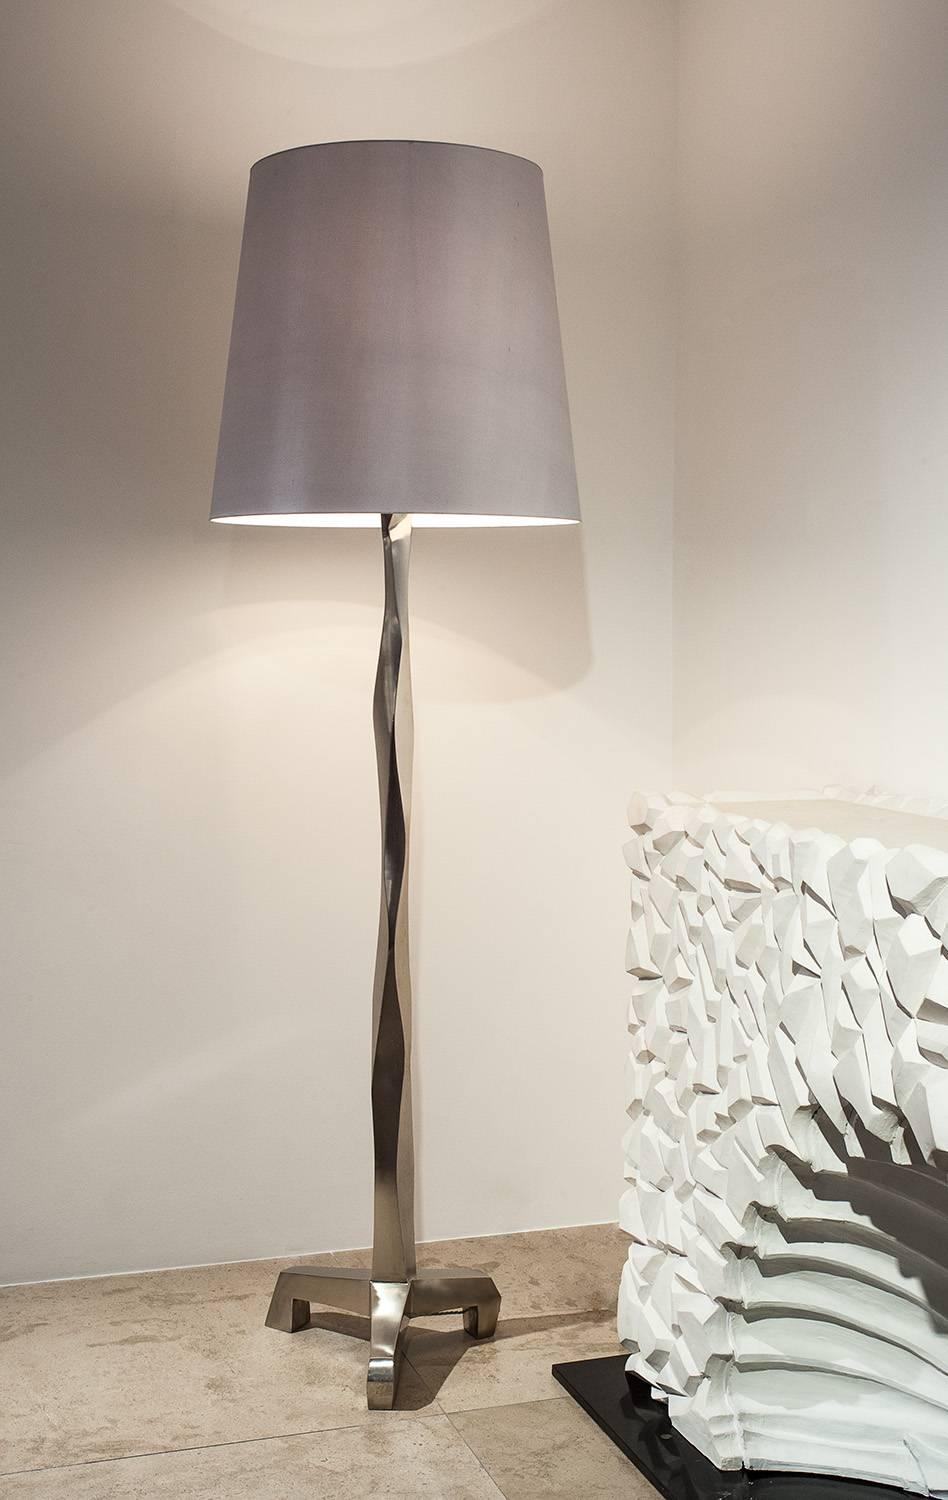 Garouste & Bonetti
Standard lamp 'Masai' 
1999
Patinated / brushed nickel 
Measures: H 215 x D 43 cm / H 84.6 x D 16.9 in.

For EU buyers this piece is subject to a 20% VAT tax, which will be added to the price after the order has confirmed.